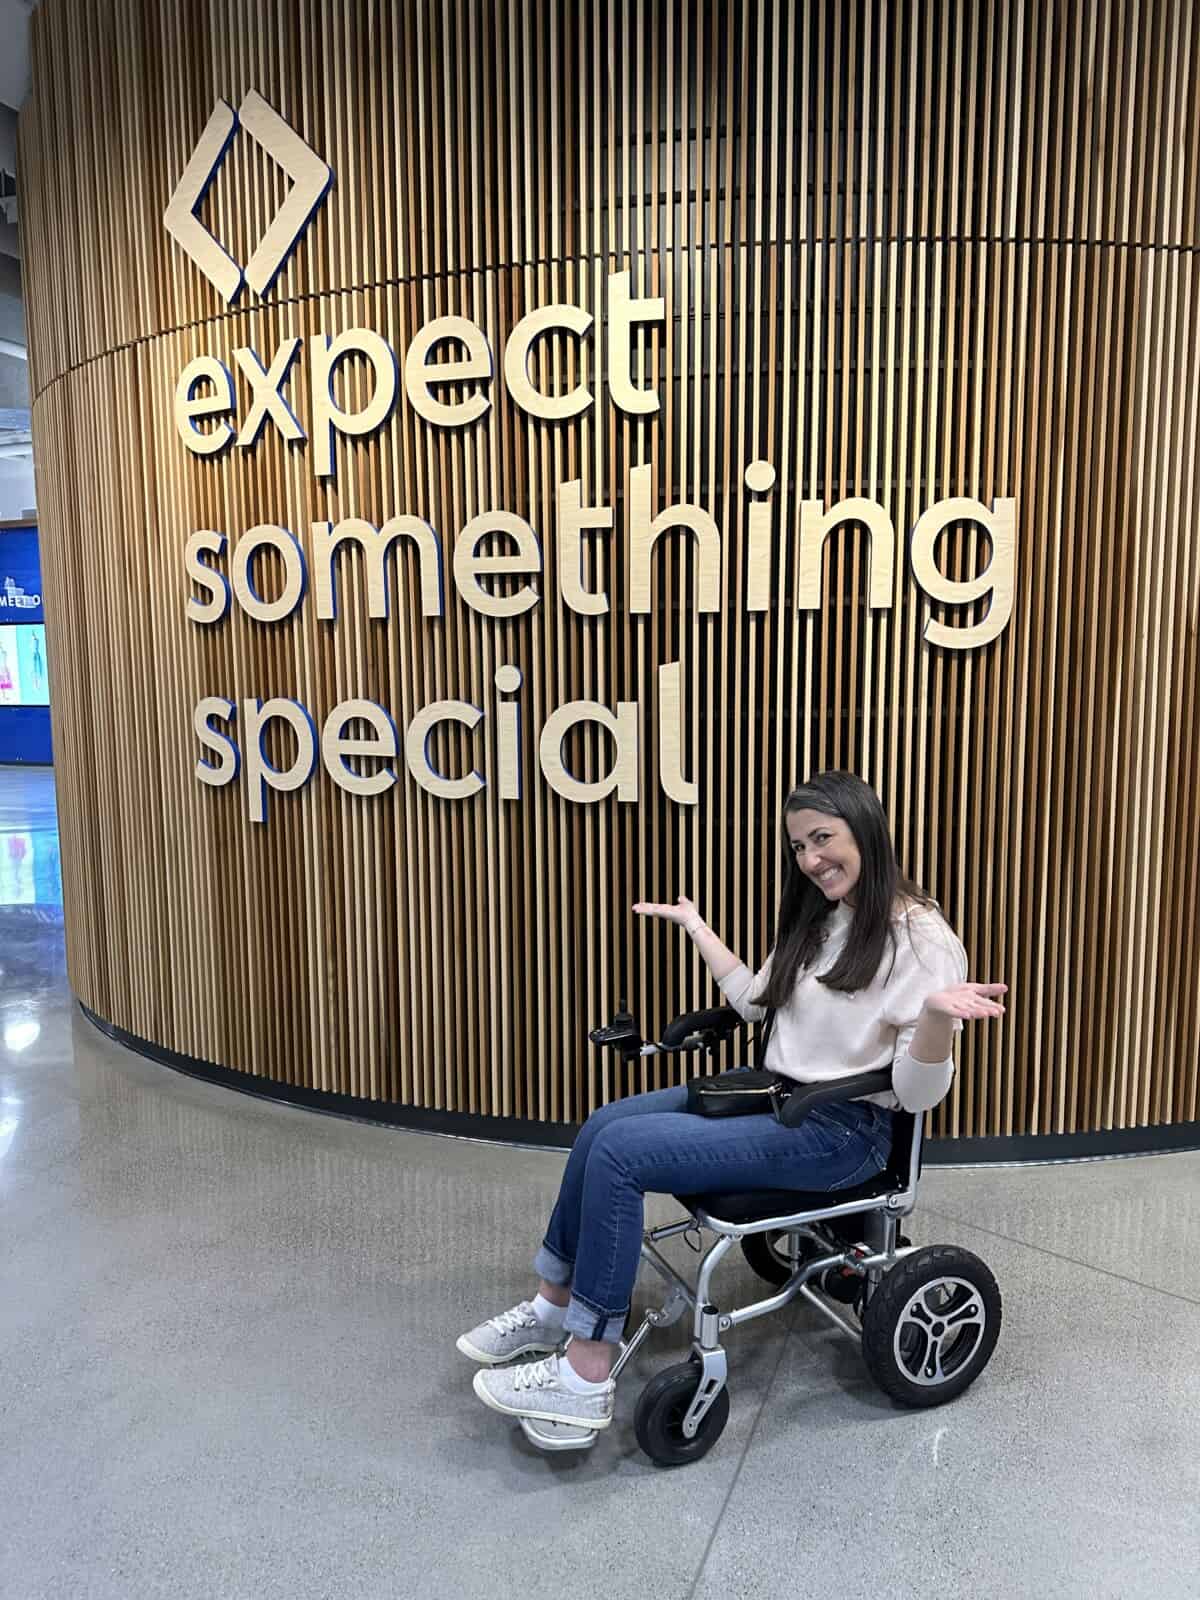 Rachel Farnsworth in a wheelchair at Sam's Club Home Office, in front of their Expect Something Special sign.